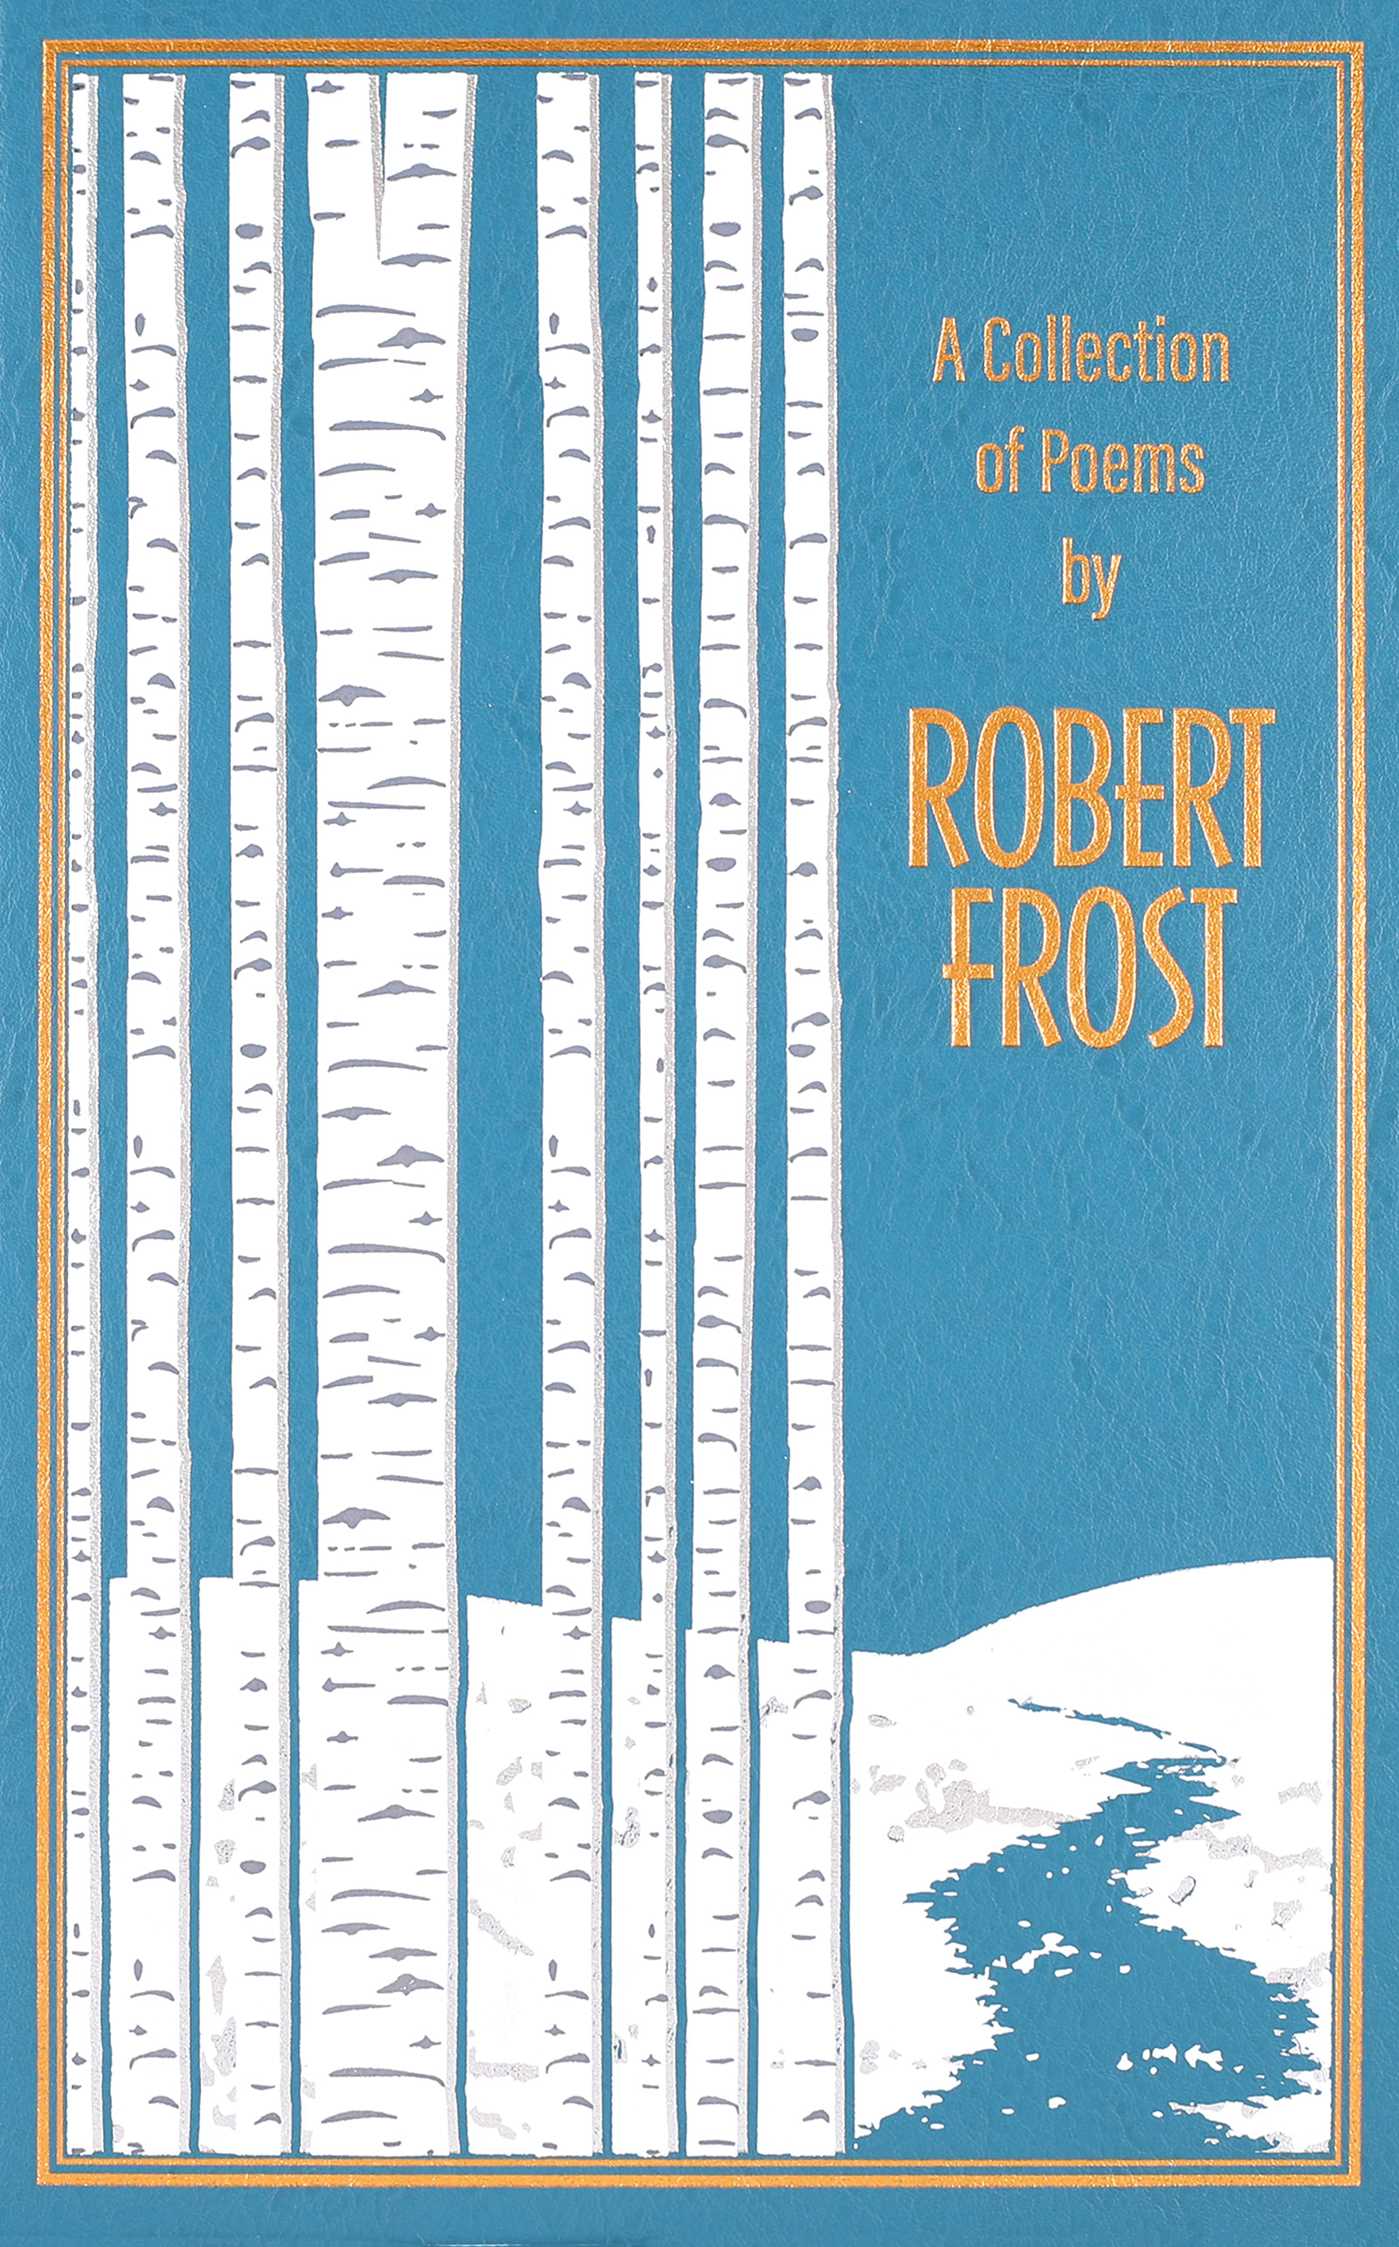 Collection of Poems by Robert Frost, A